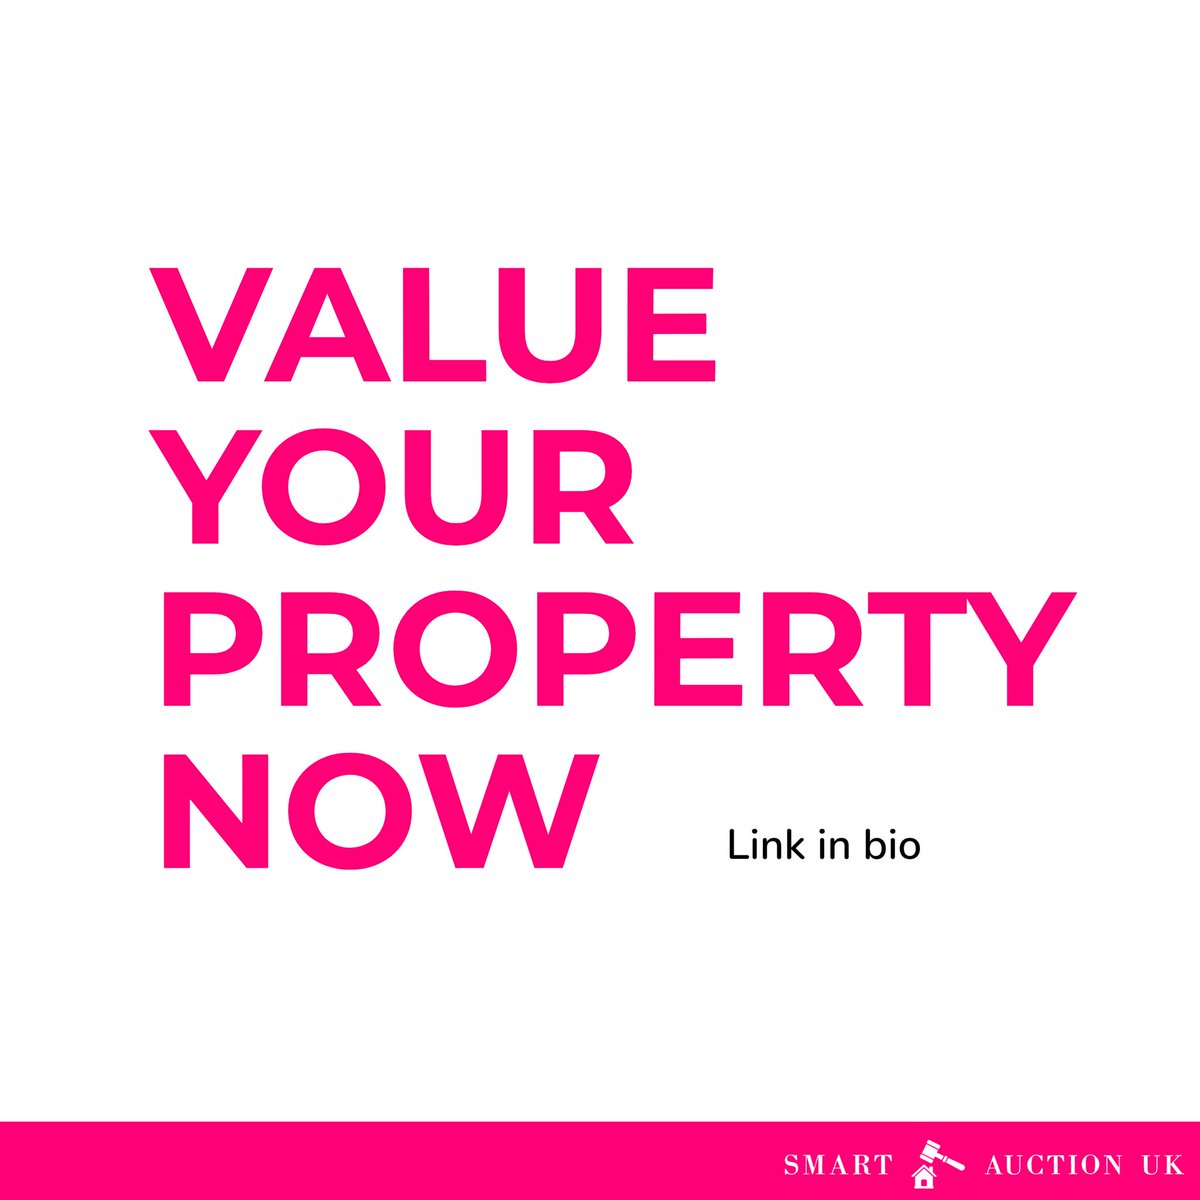 Our free property valuation gives you the lowest, middle and upper values your property could sell for.
 
What price you may be expecting to sell for will be dependent on the condition of your property and other market and geographical factors.

#propertyvaluation